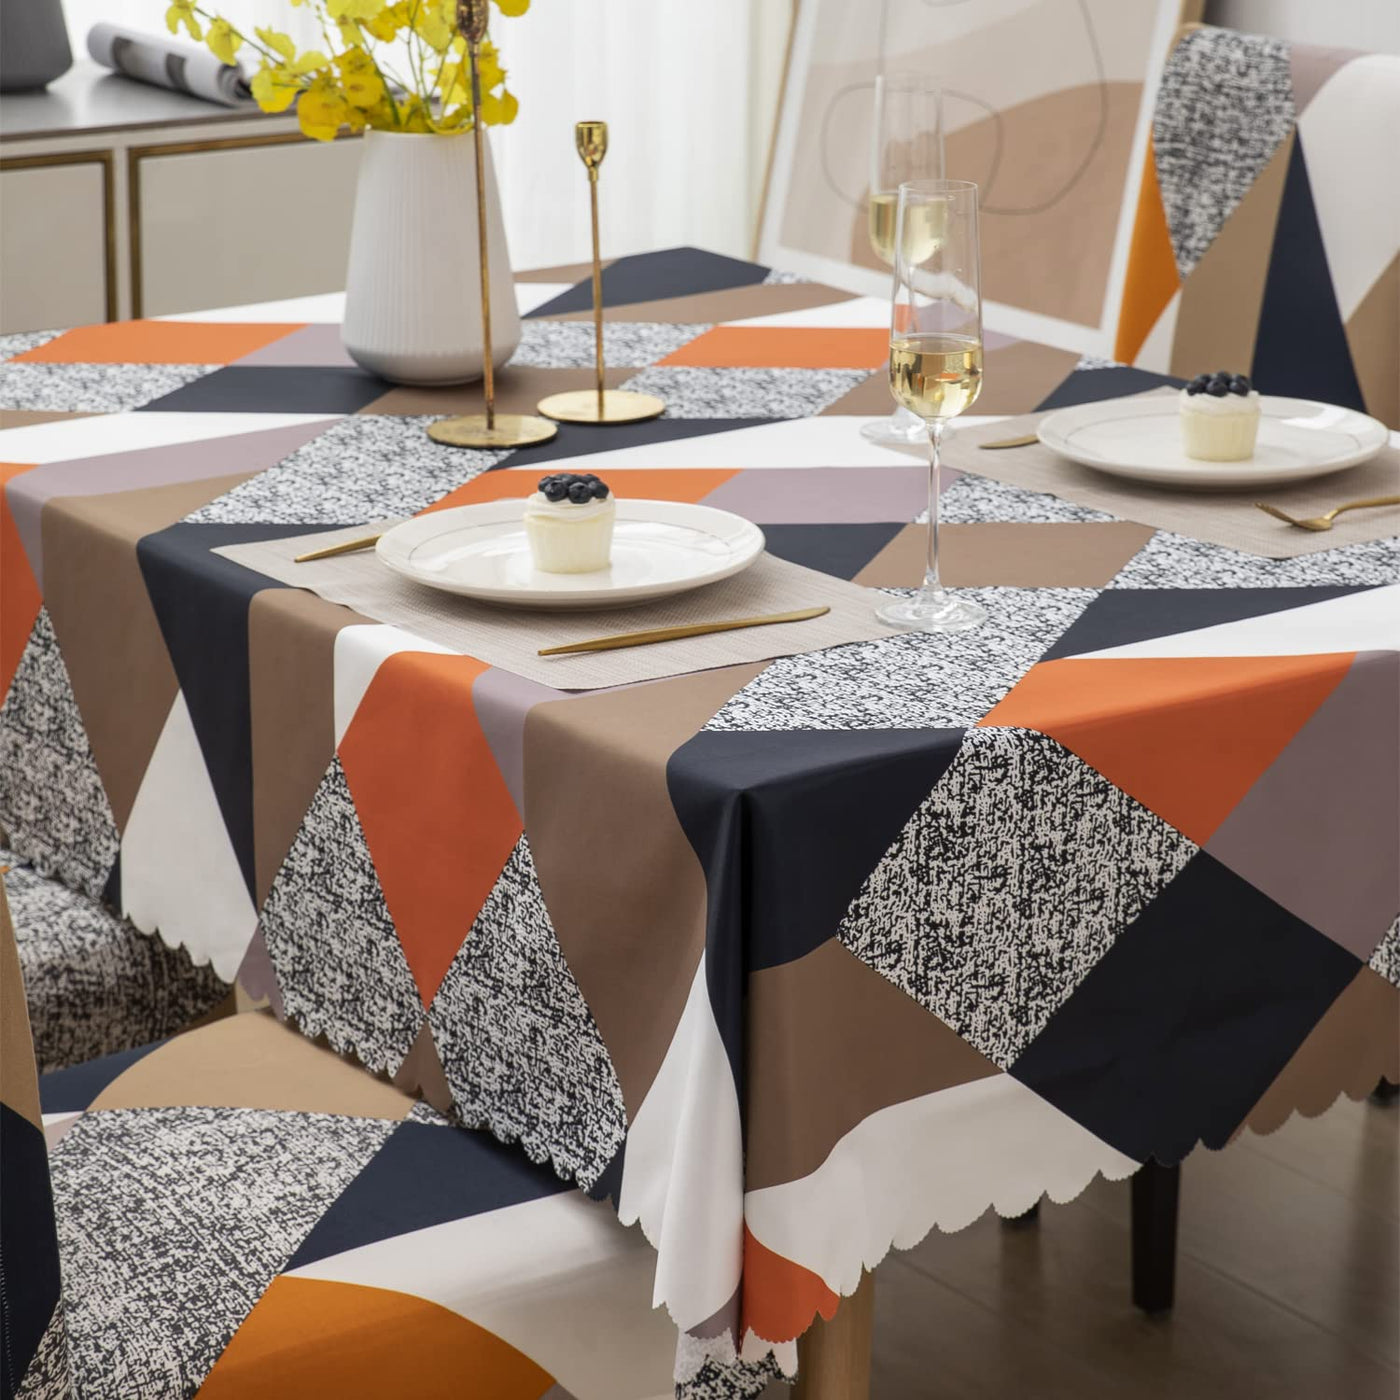 Dining Table Cover (Grey Complex, 1 Table Cover)